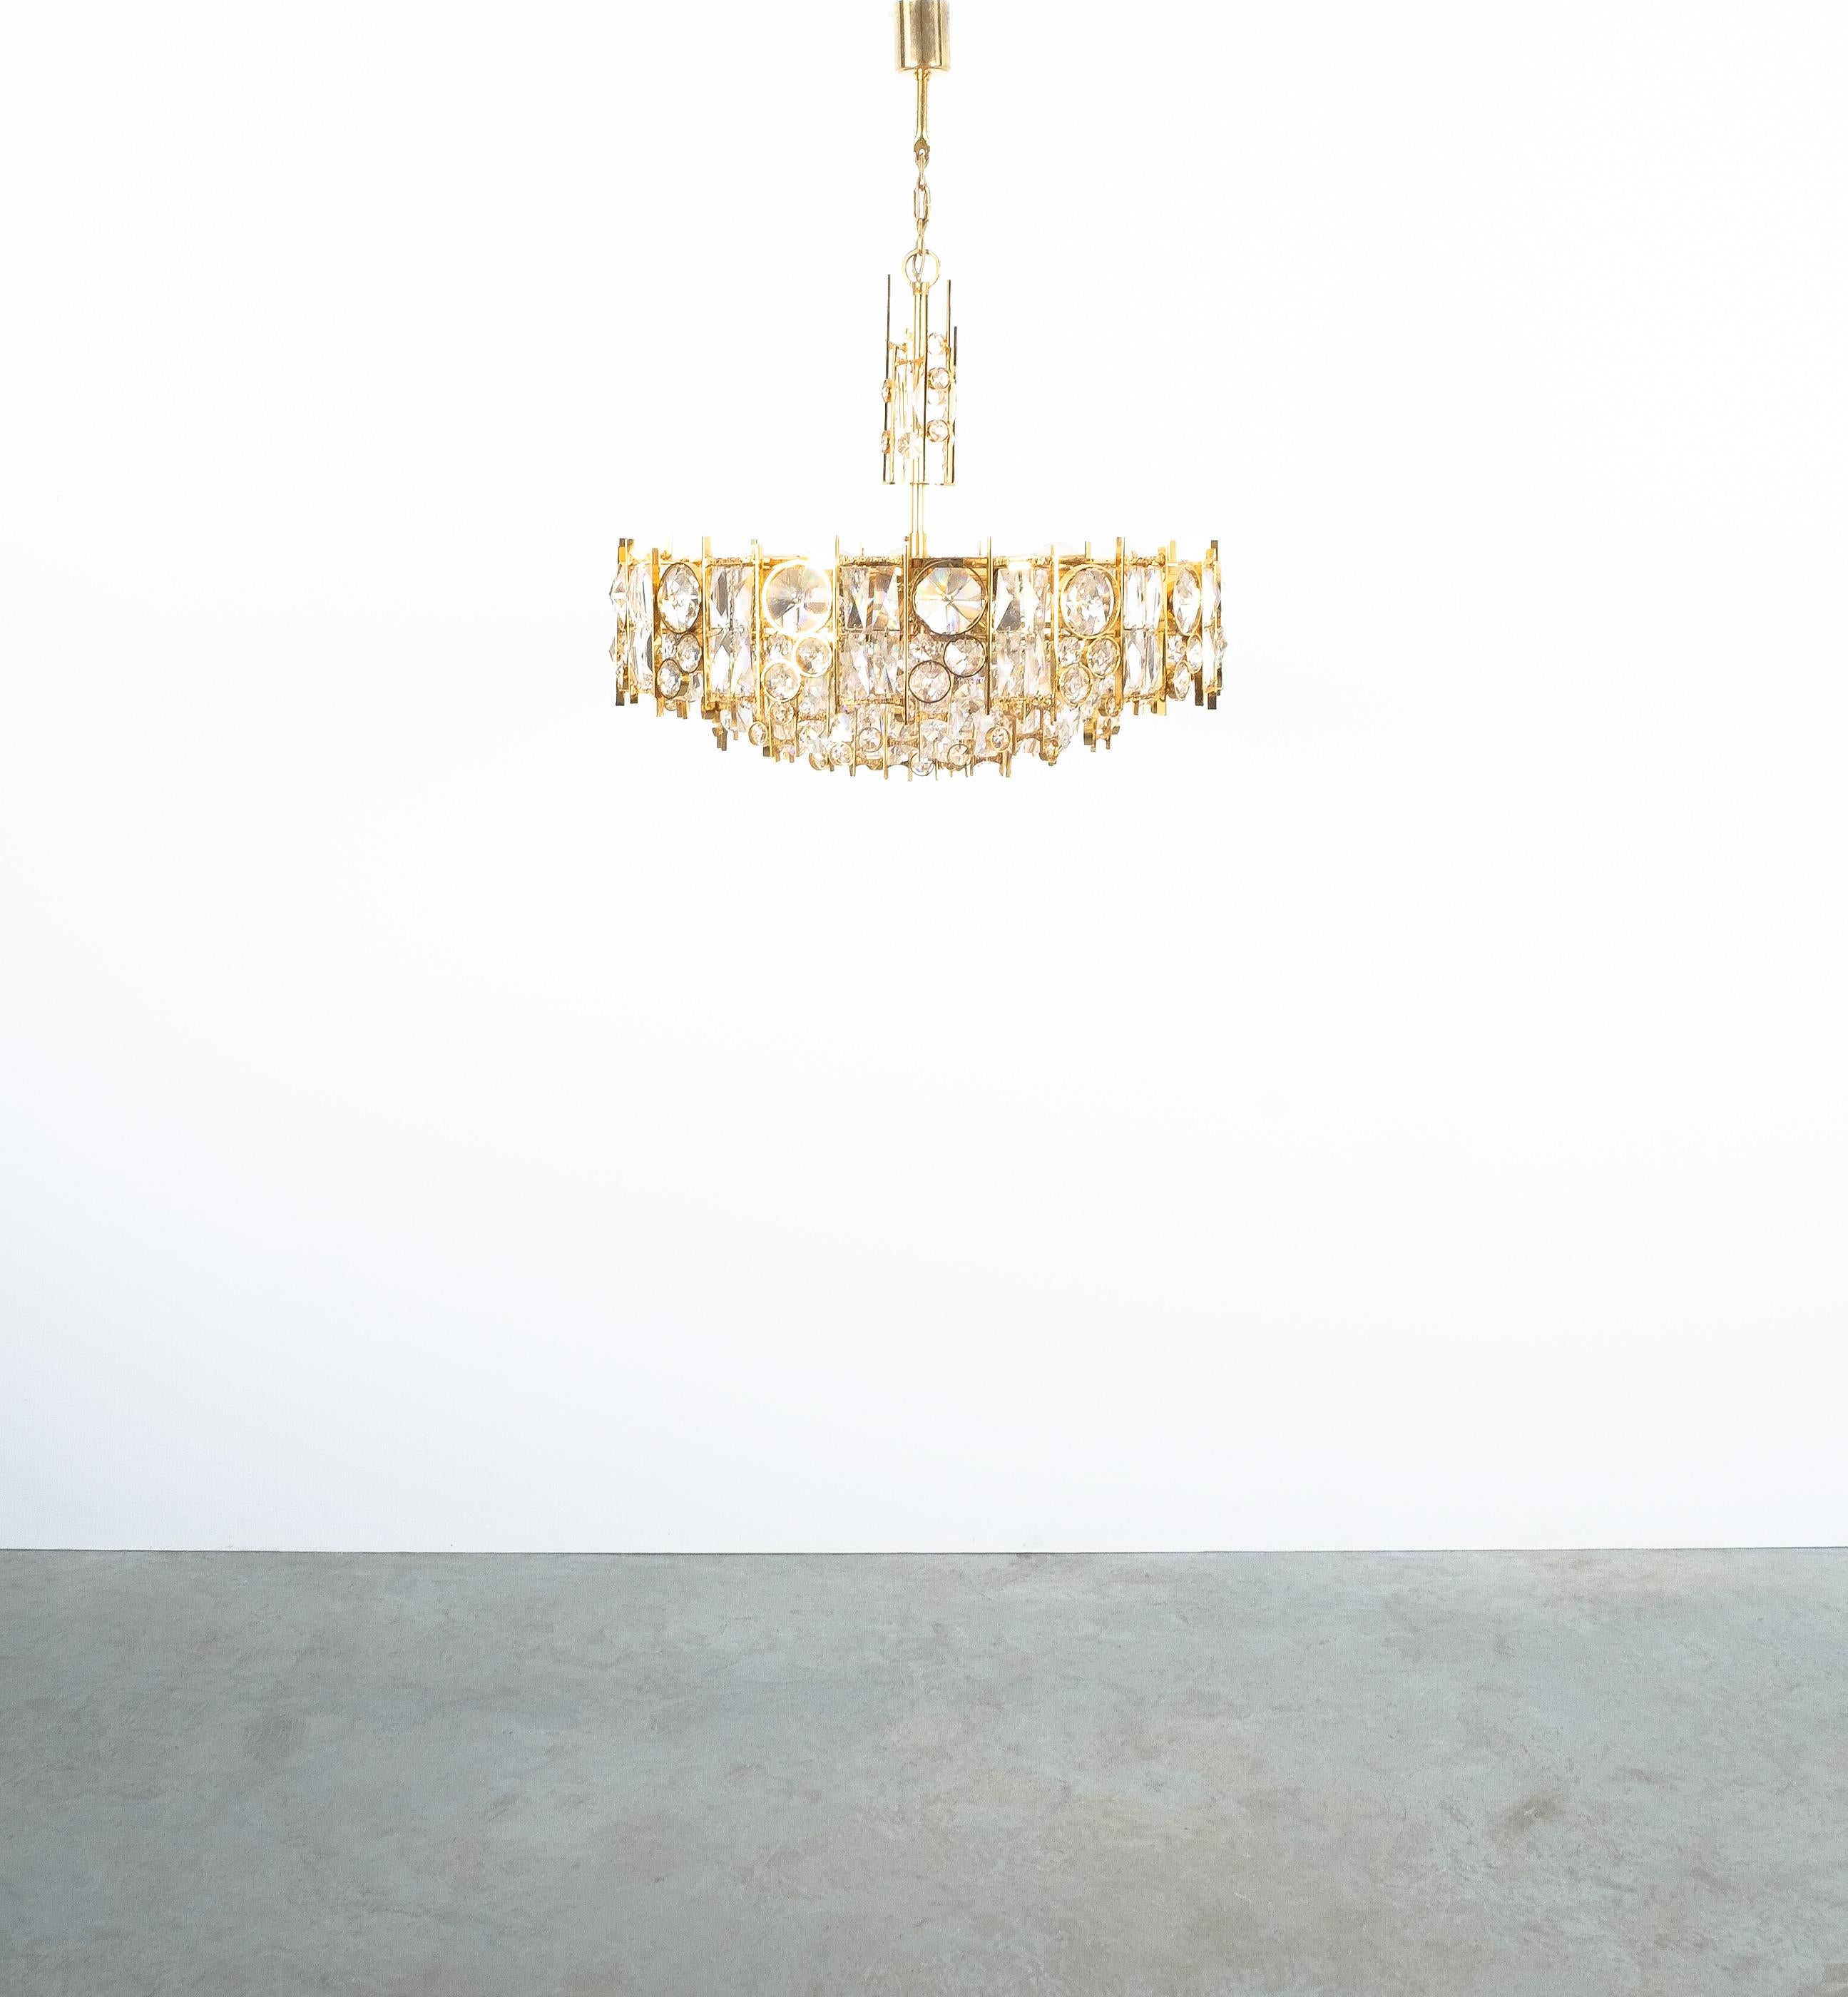 Large crystal glass encrusted gilt brass chandelier, Germany 1960

Very well preserved large 25.6